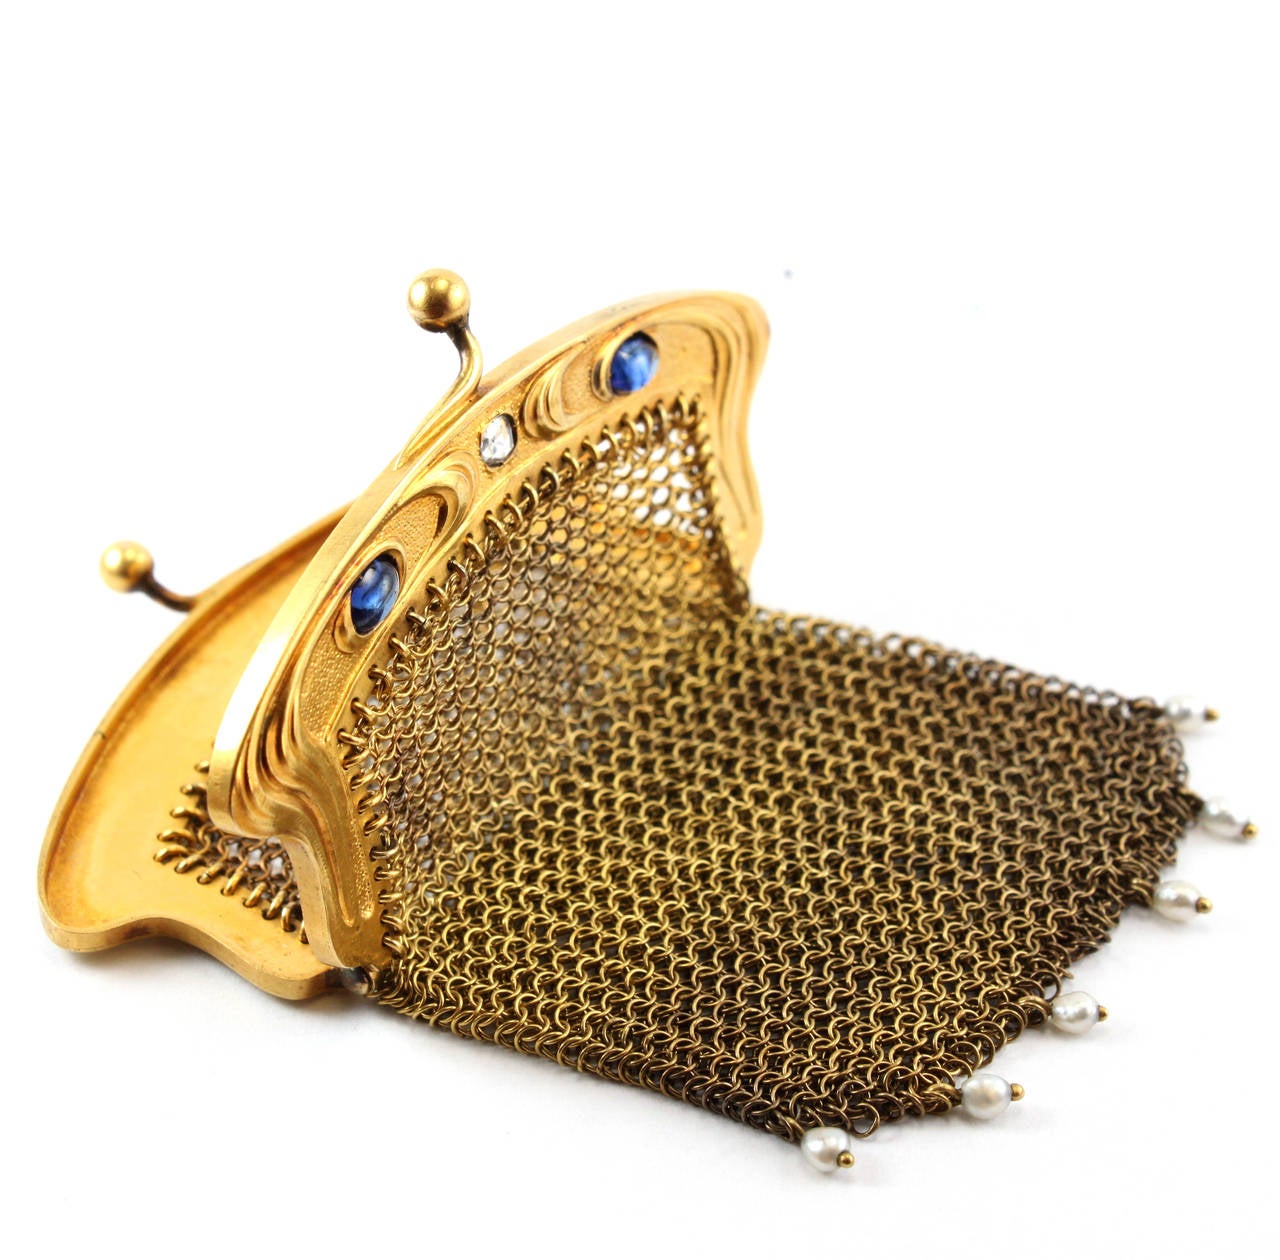 An Art Nouveau gold mesh bag, 1900, with two sapphire cabochons, a rosecut diamond and hanging seed pearls. The gold mesh is beautifully interlinked and in an excellent condition. The gold bag has Dutch hallmarks and is in 15k yellow gold.